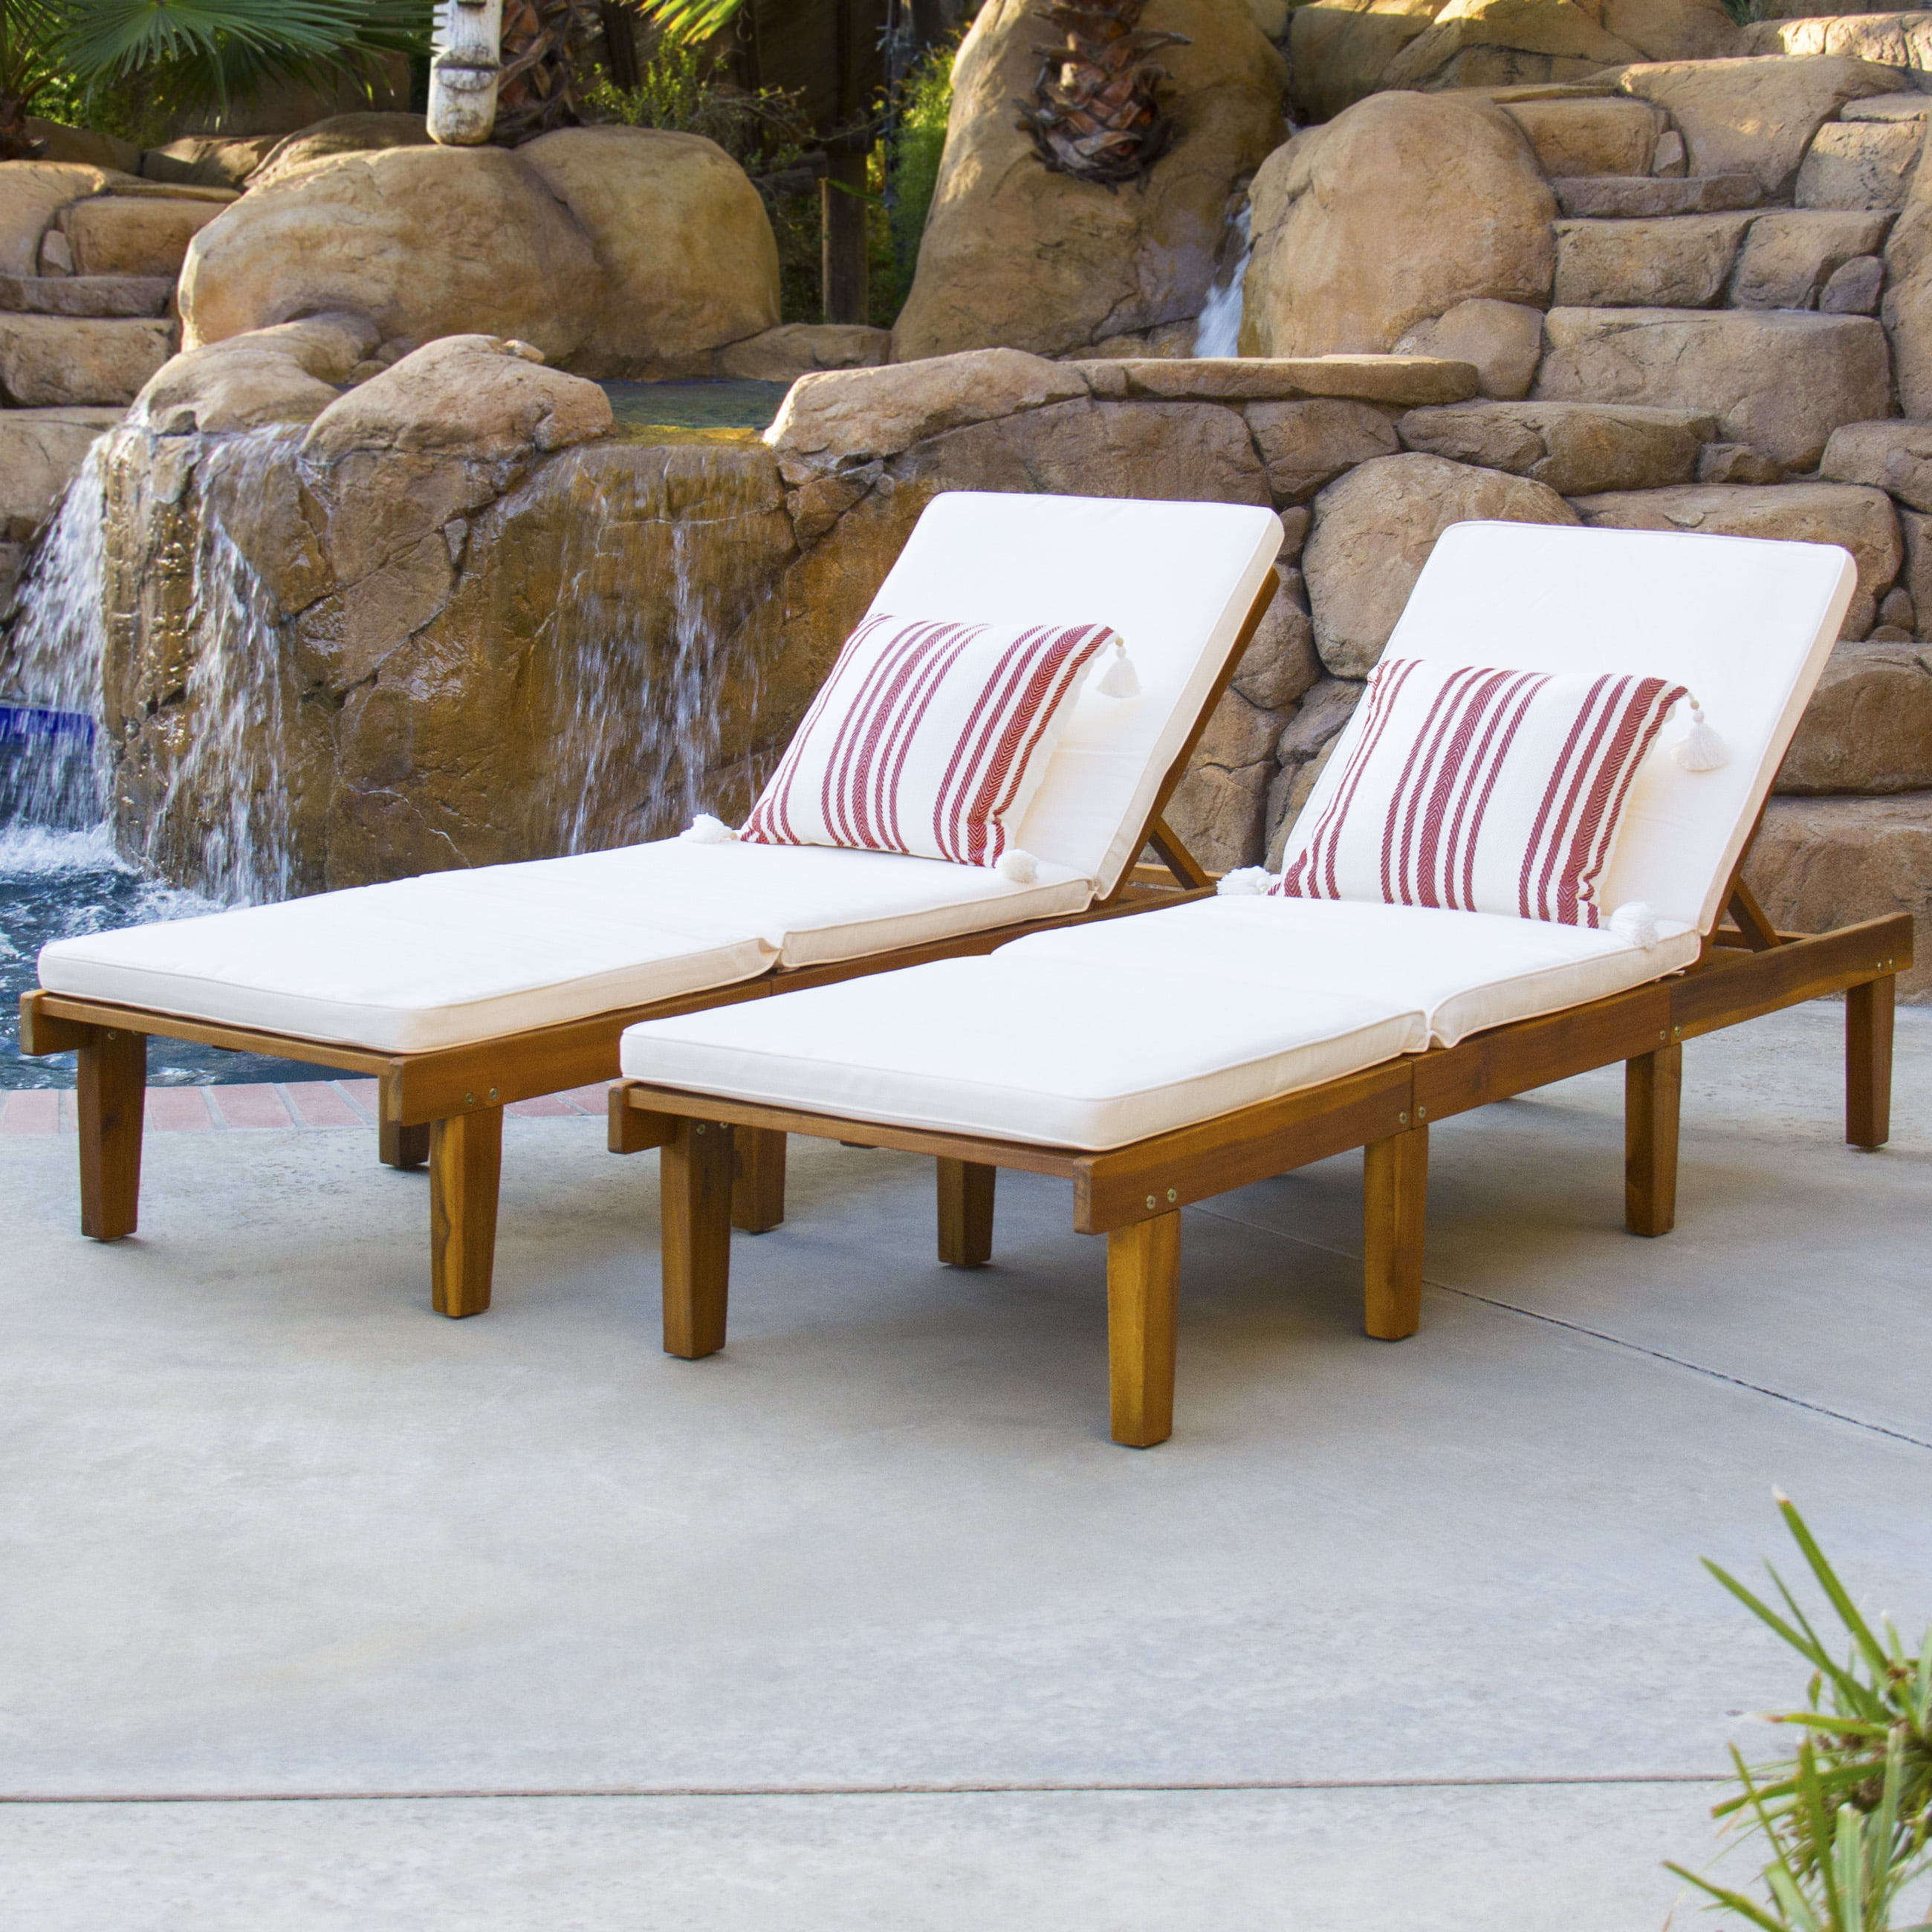 Best Choice Products Outdoor Patio Poolside Furniture Set ...